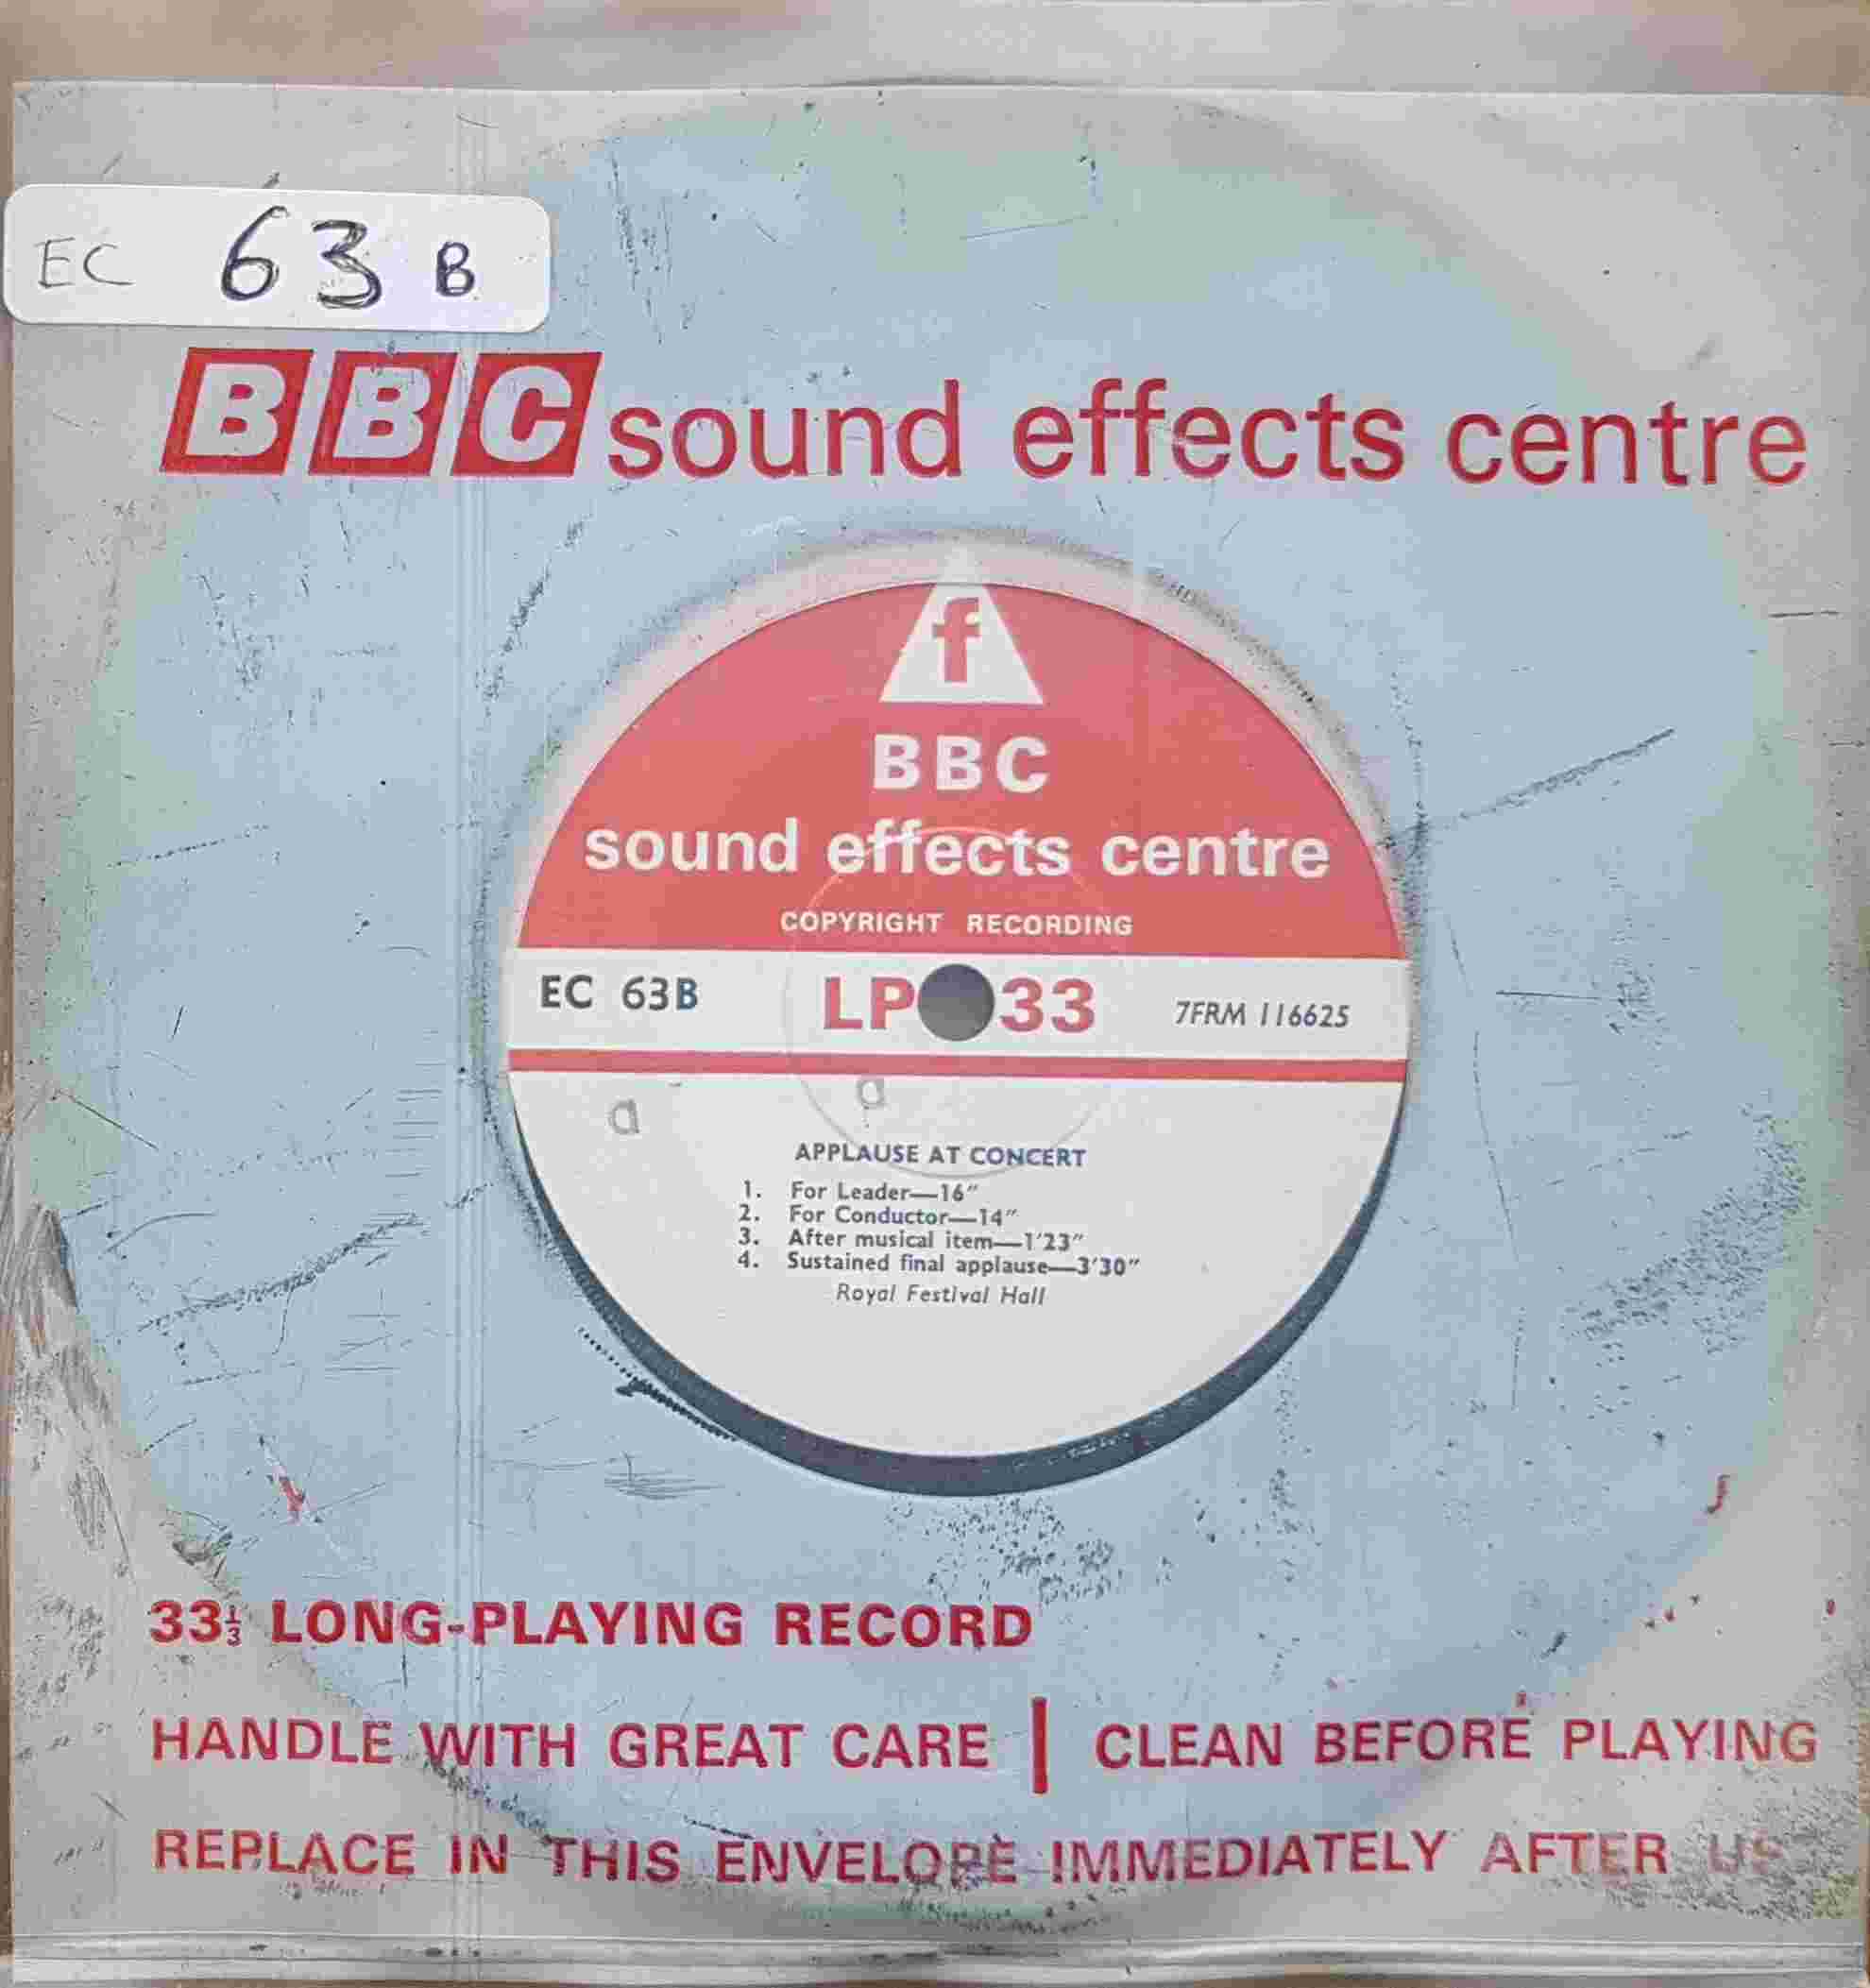 Picture of EC 63B Applause at concert by artist Not registered from the BBC singles - Records and Tapes library